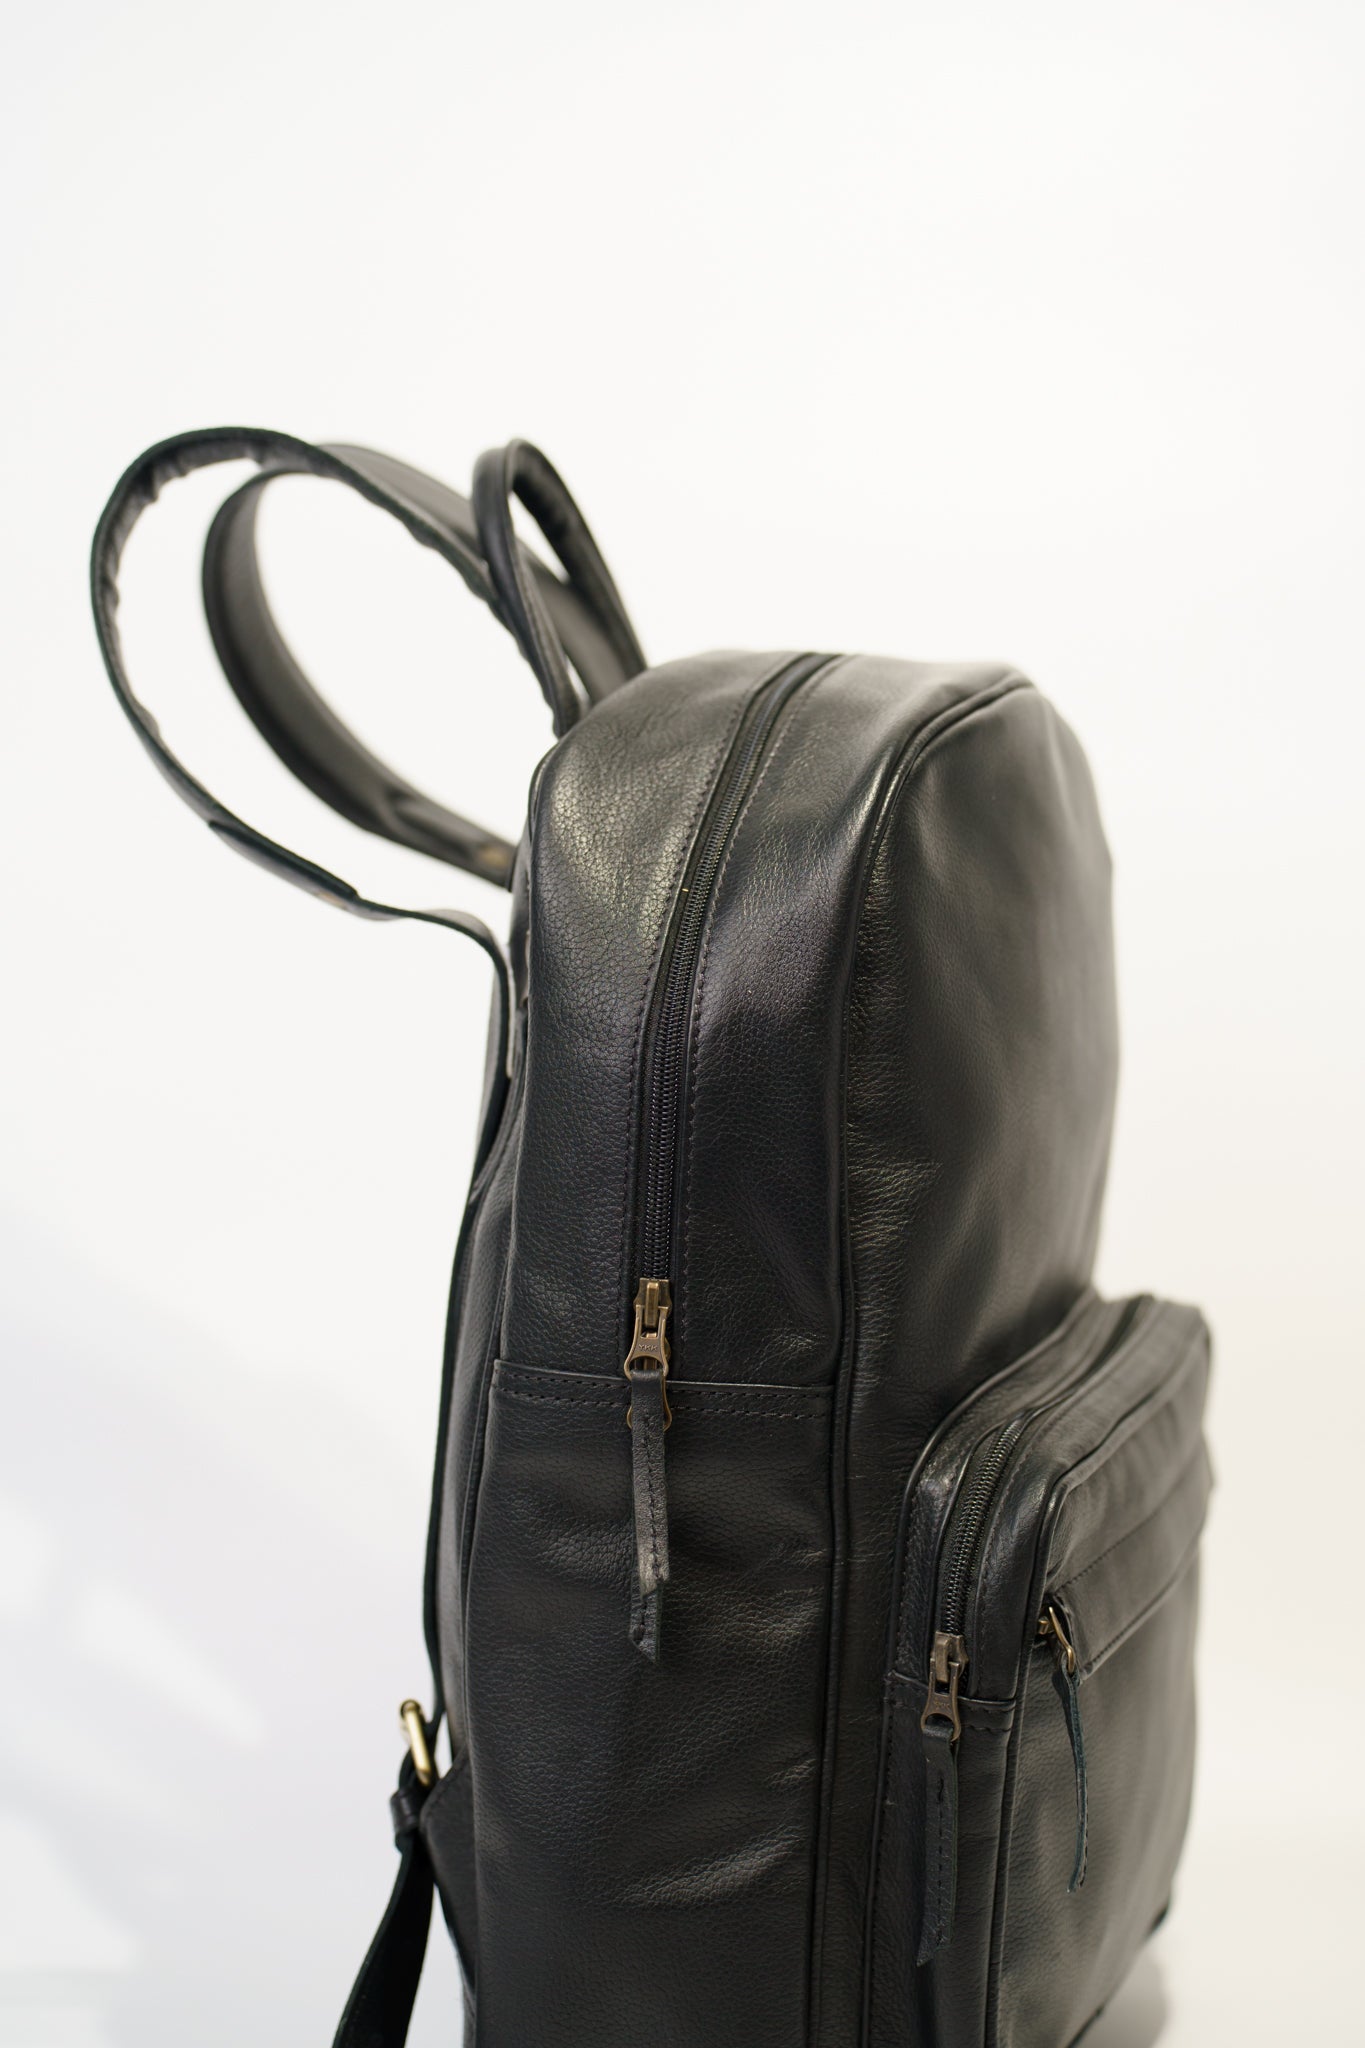 Close side view of Chamra's black leather bag with a hand carry strap, shoulder straps, and side pockets for maximum utility.